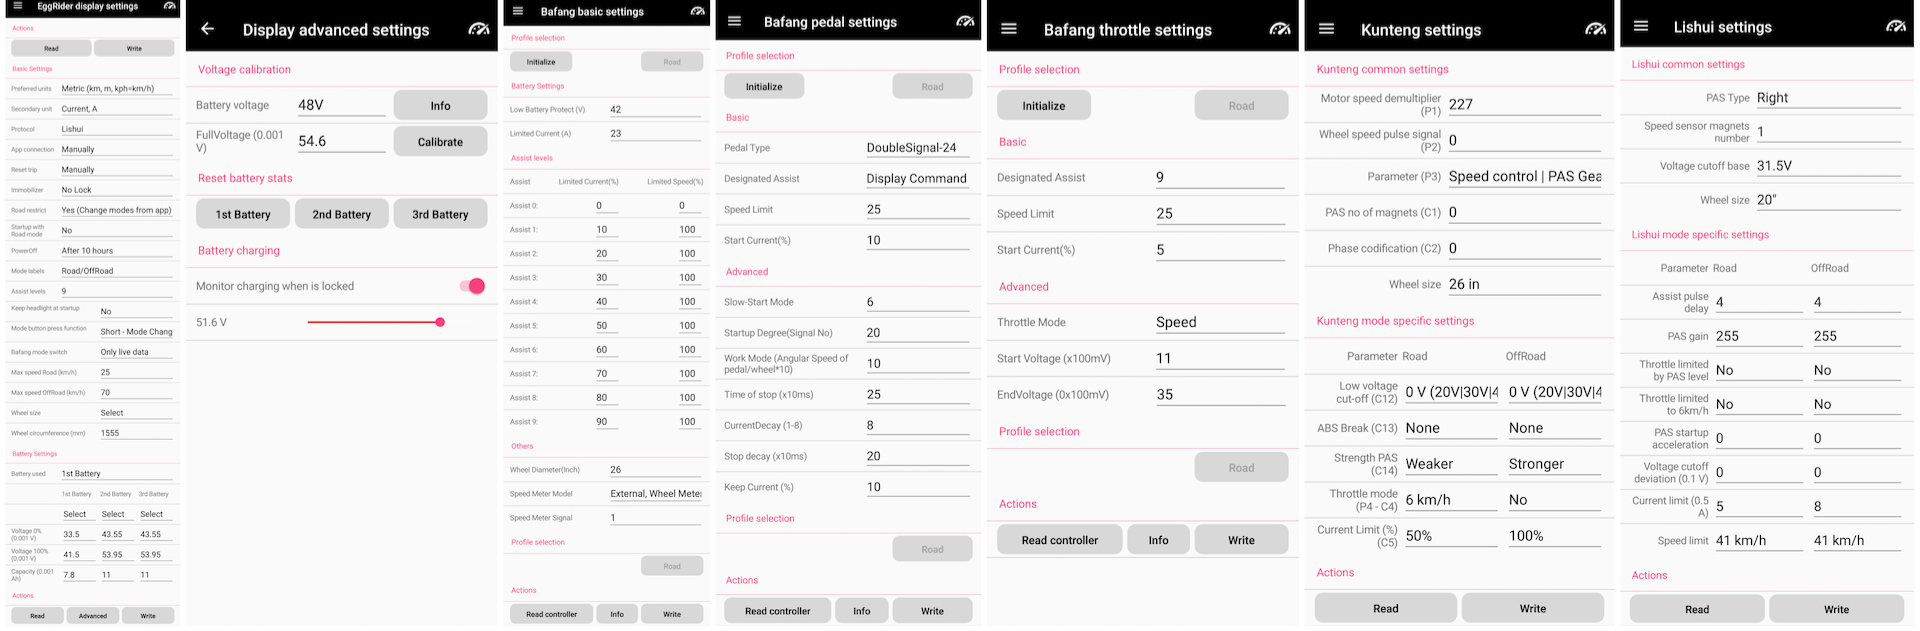 EggRider app overview settings pages